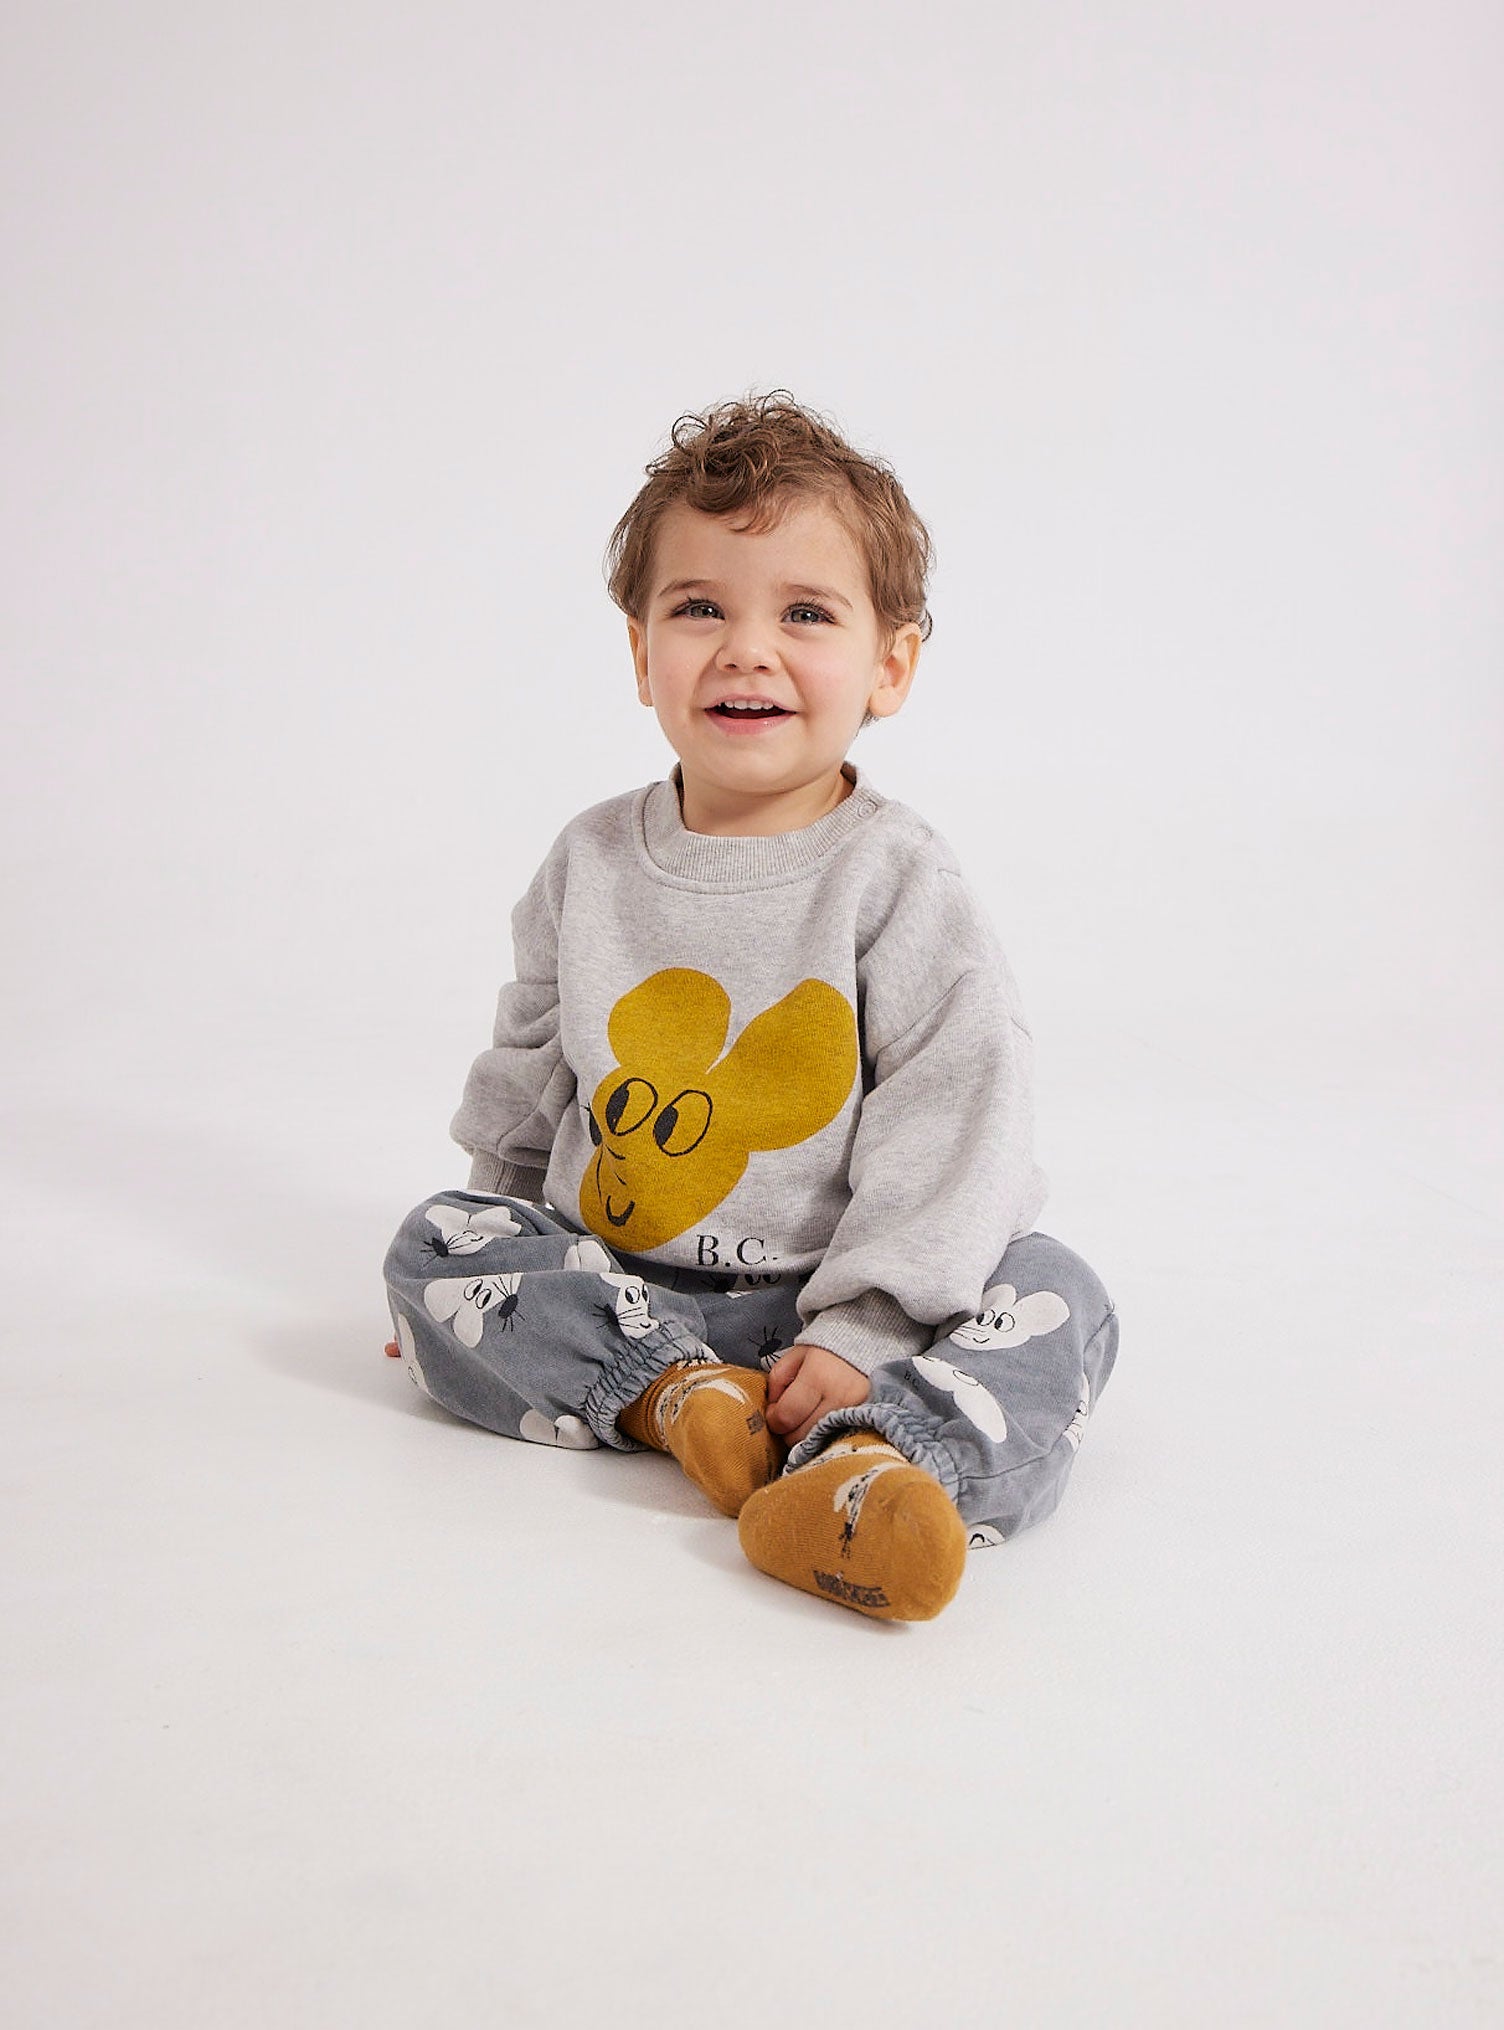 Baby Mouse all over jogging pants - 3M